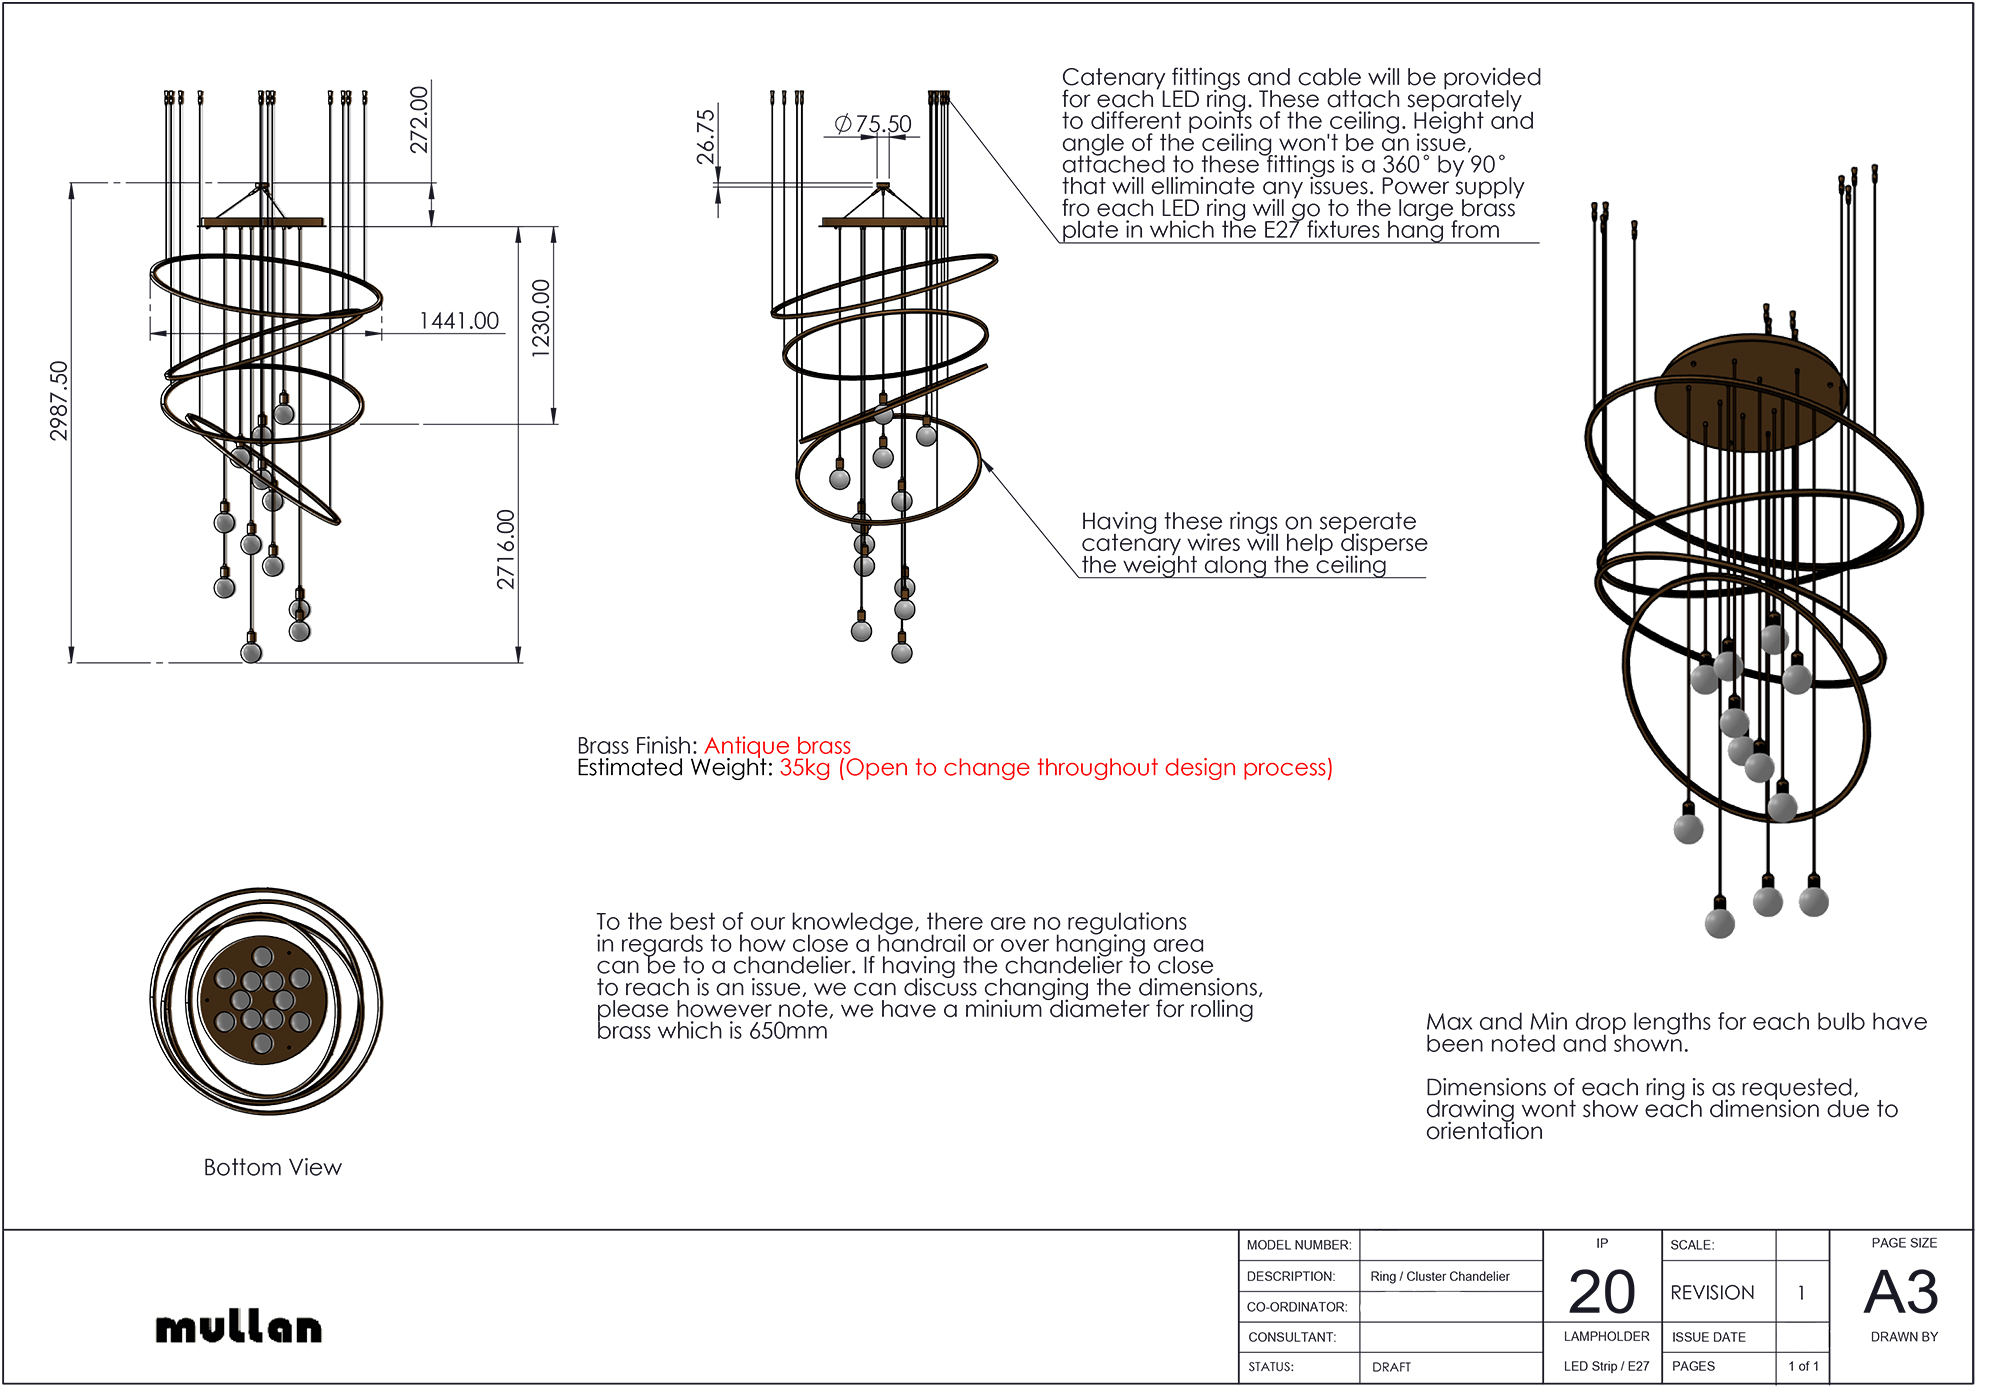 The technical drawing of the chandelier with the fittings spread out.